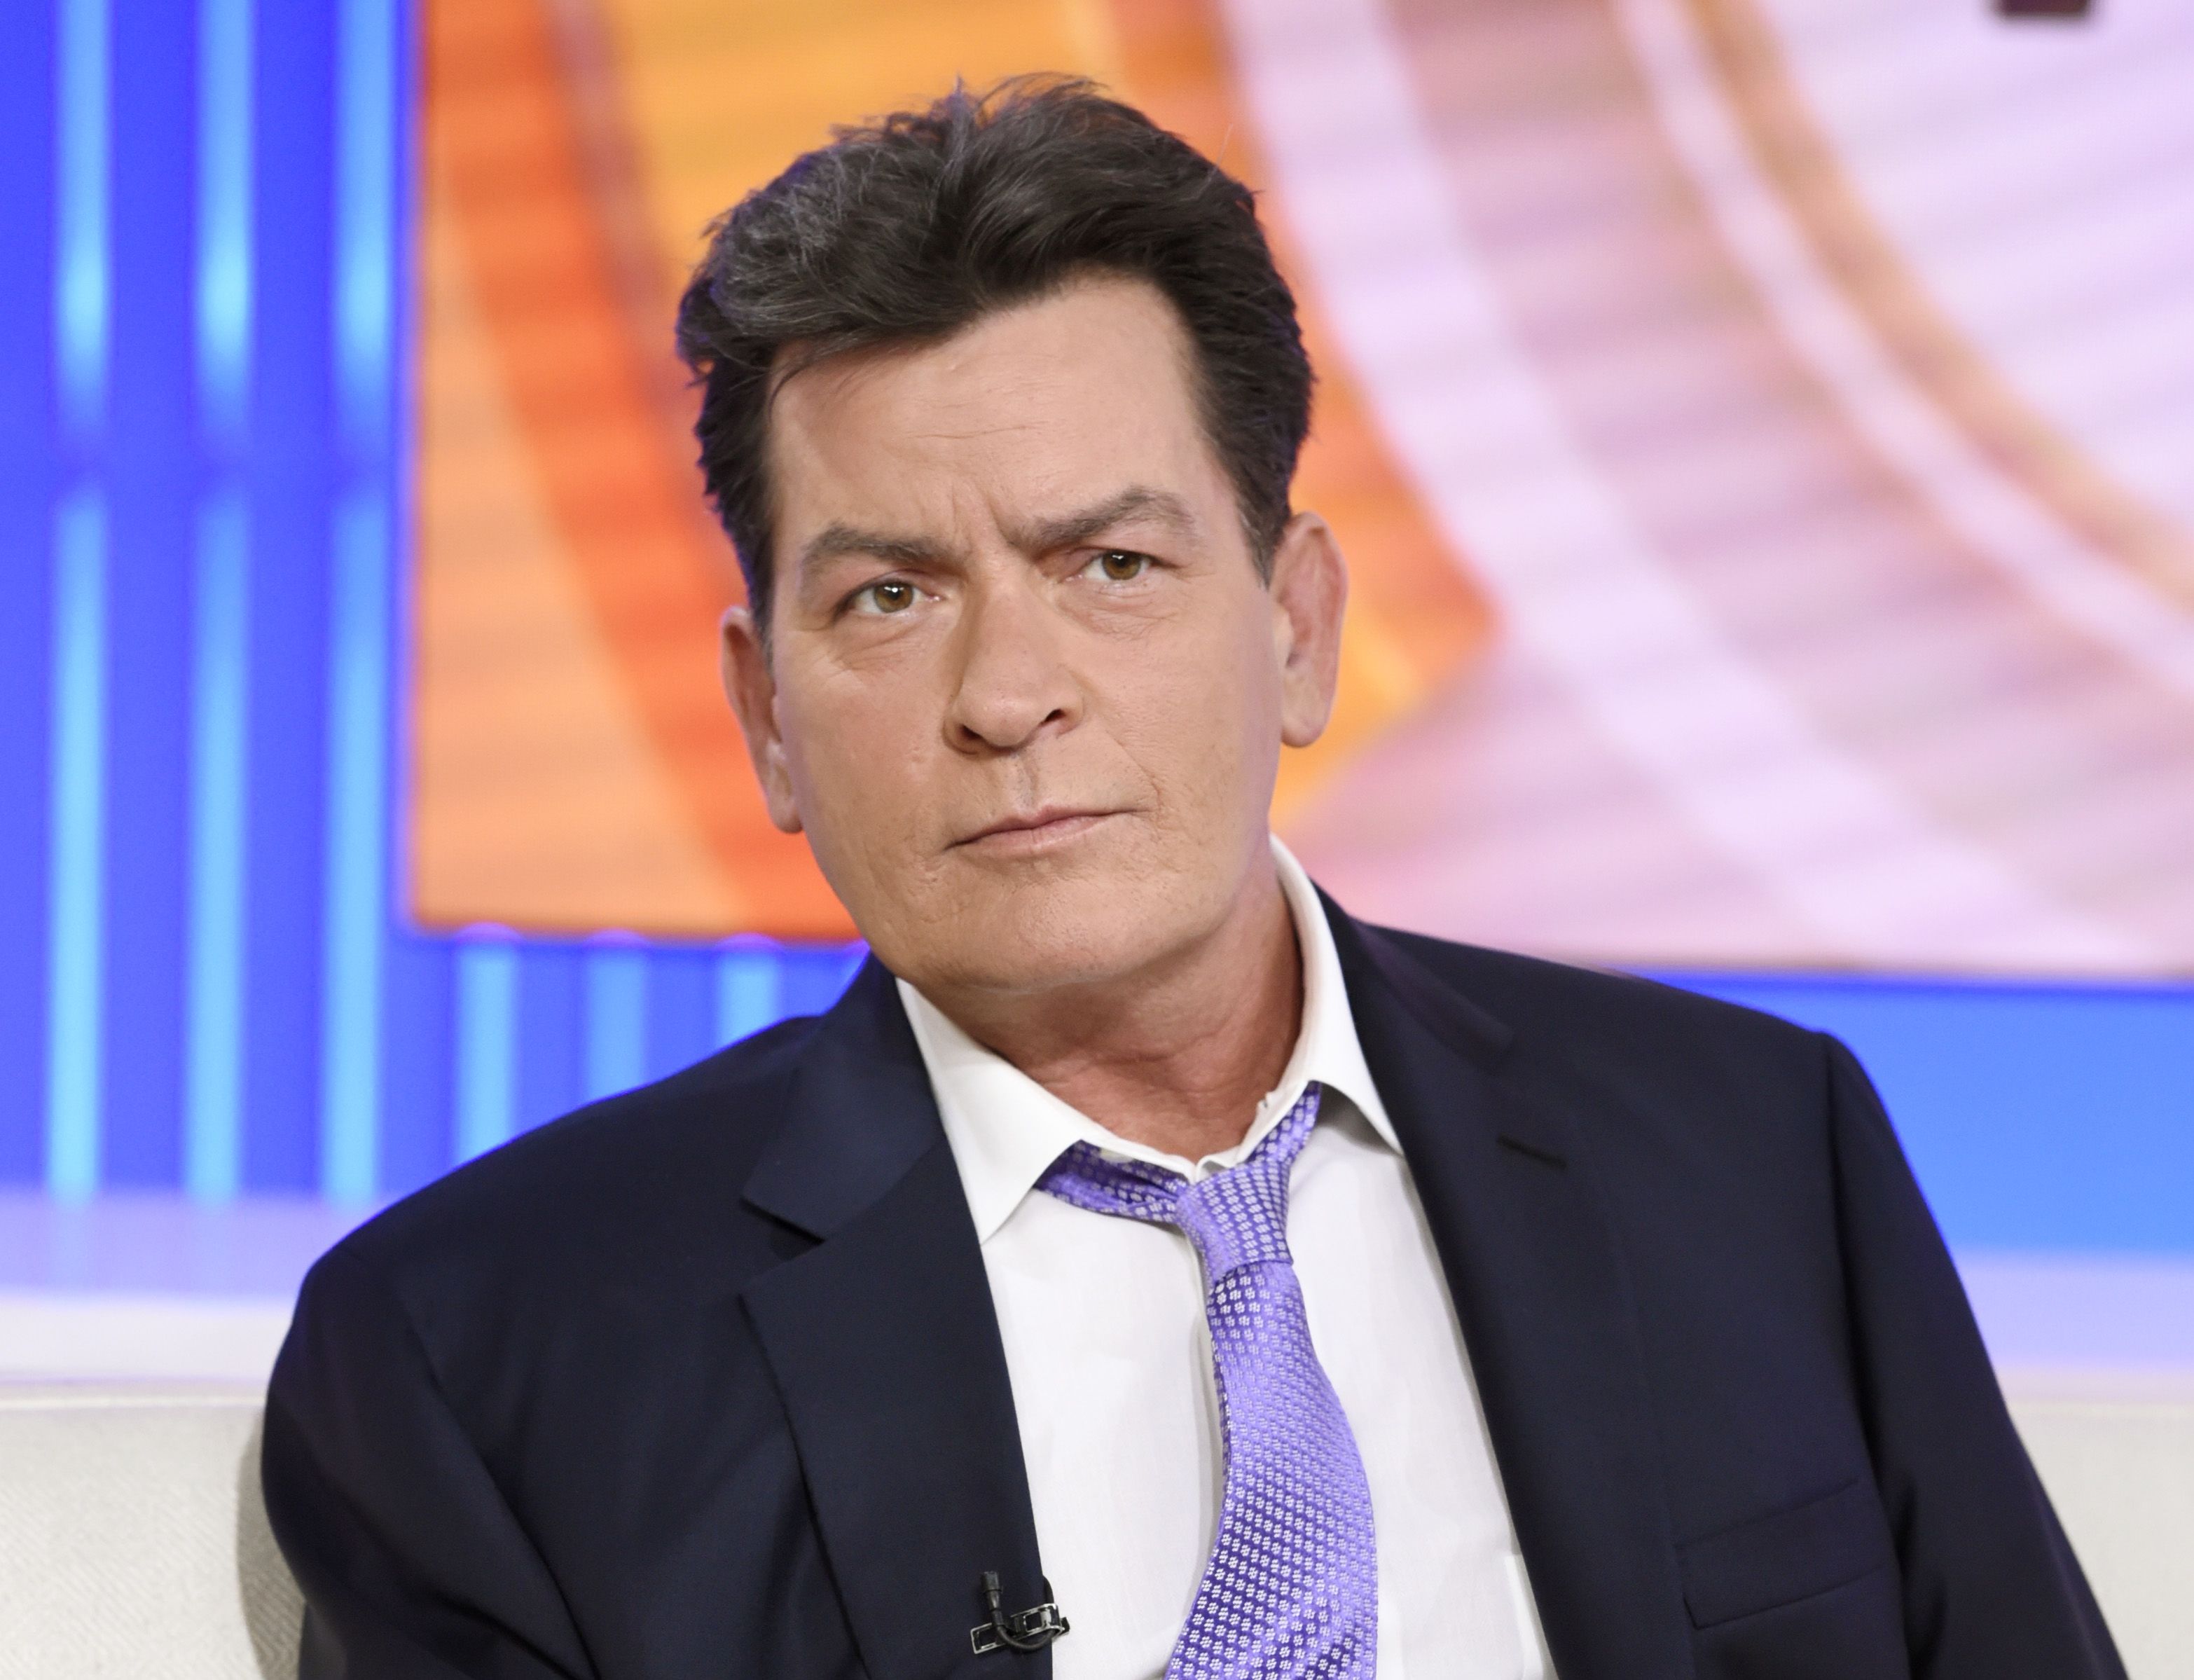 Charlie Sheen Did Steroids for 'Major League,' He Tells Sports